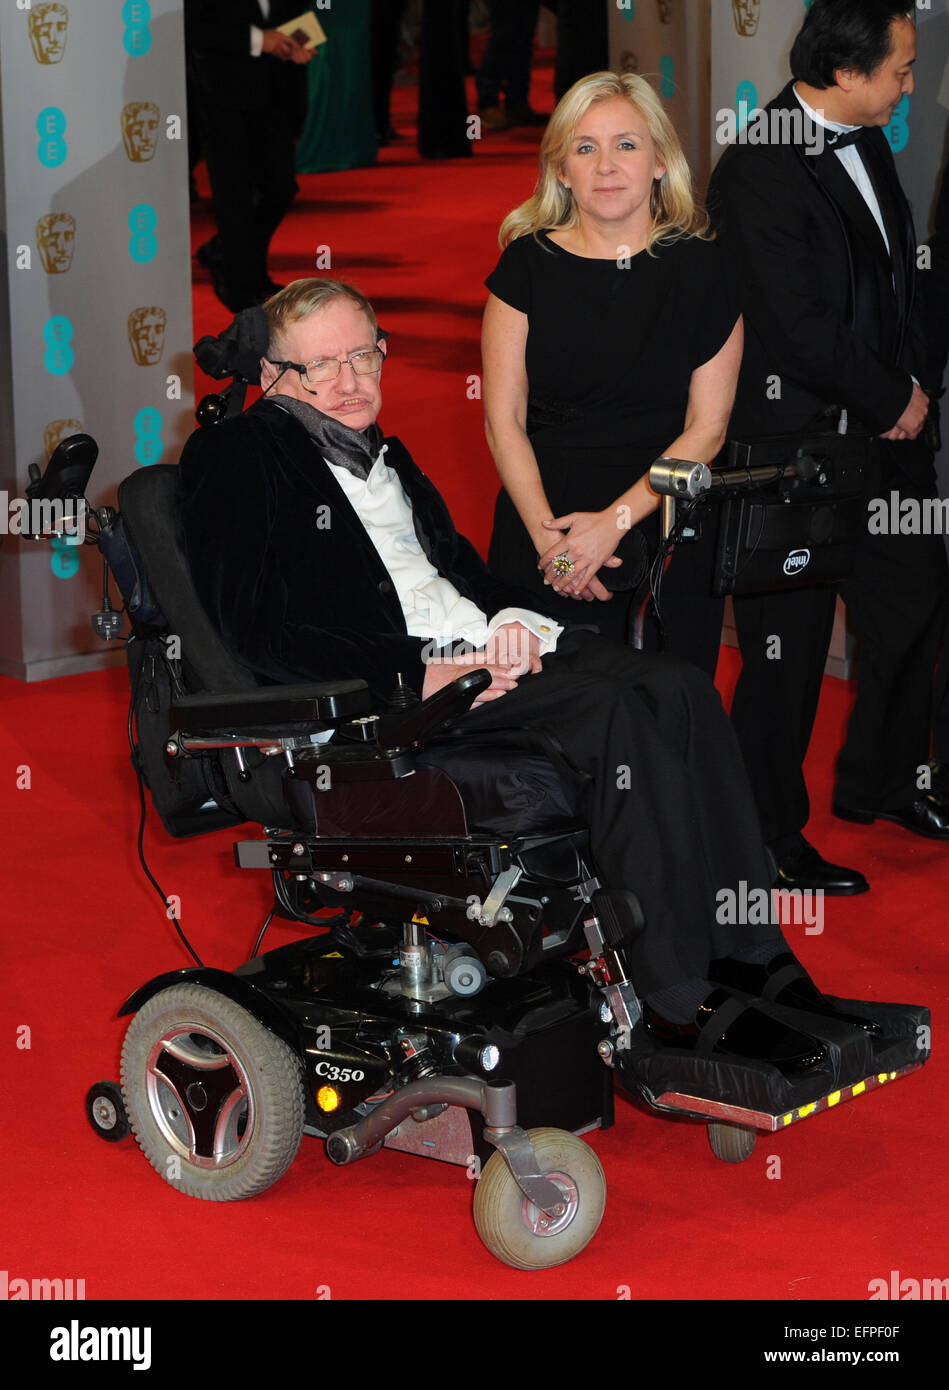 London, UK. 8th February, 2015. Stephen Hawking and Jane Wilde arrive at the 67th annual EE British Academy Film Awards, Baftas, at Royal Opera House in London, Great Britain, on 08 February 2015. Photo: Hubert Boesl /dpa - NO WIRE SERVICE - Credit:  dpa picture alliance/Alamy Live News Stock Photo